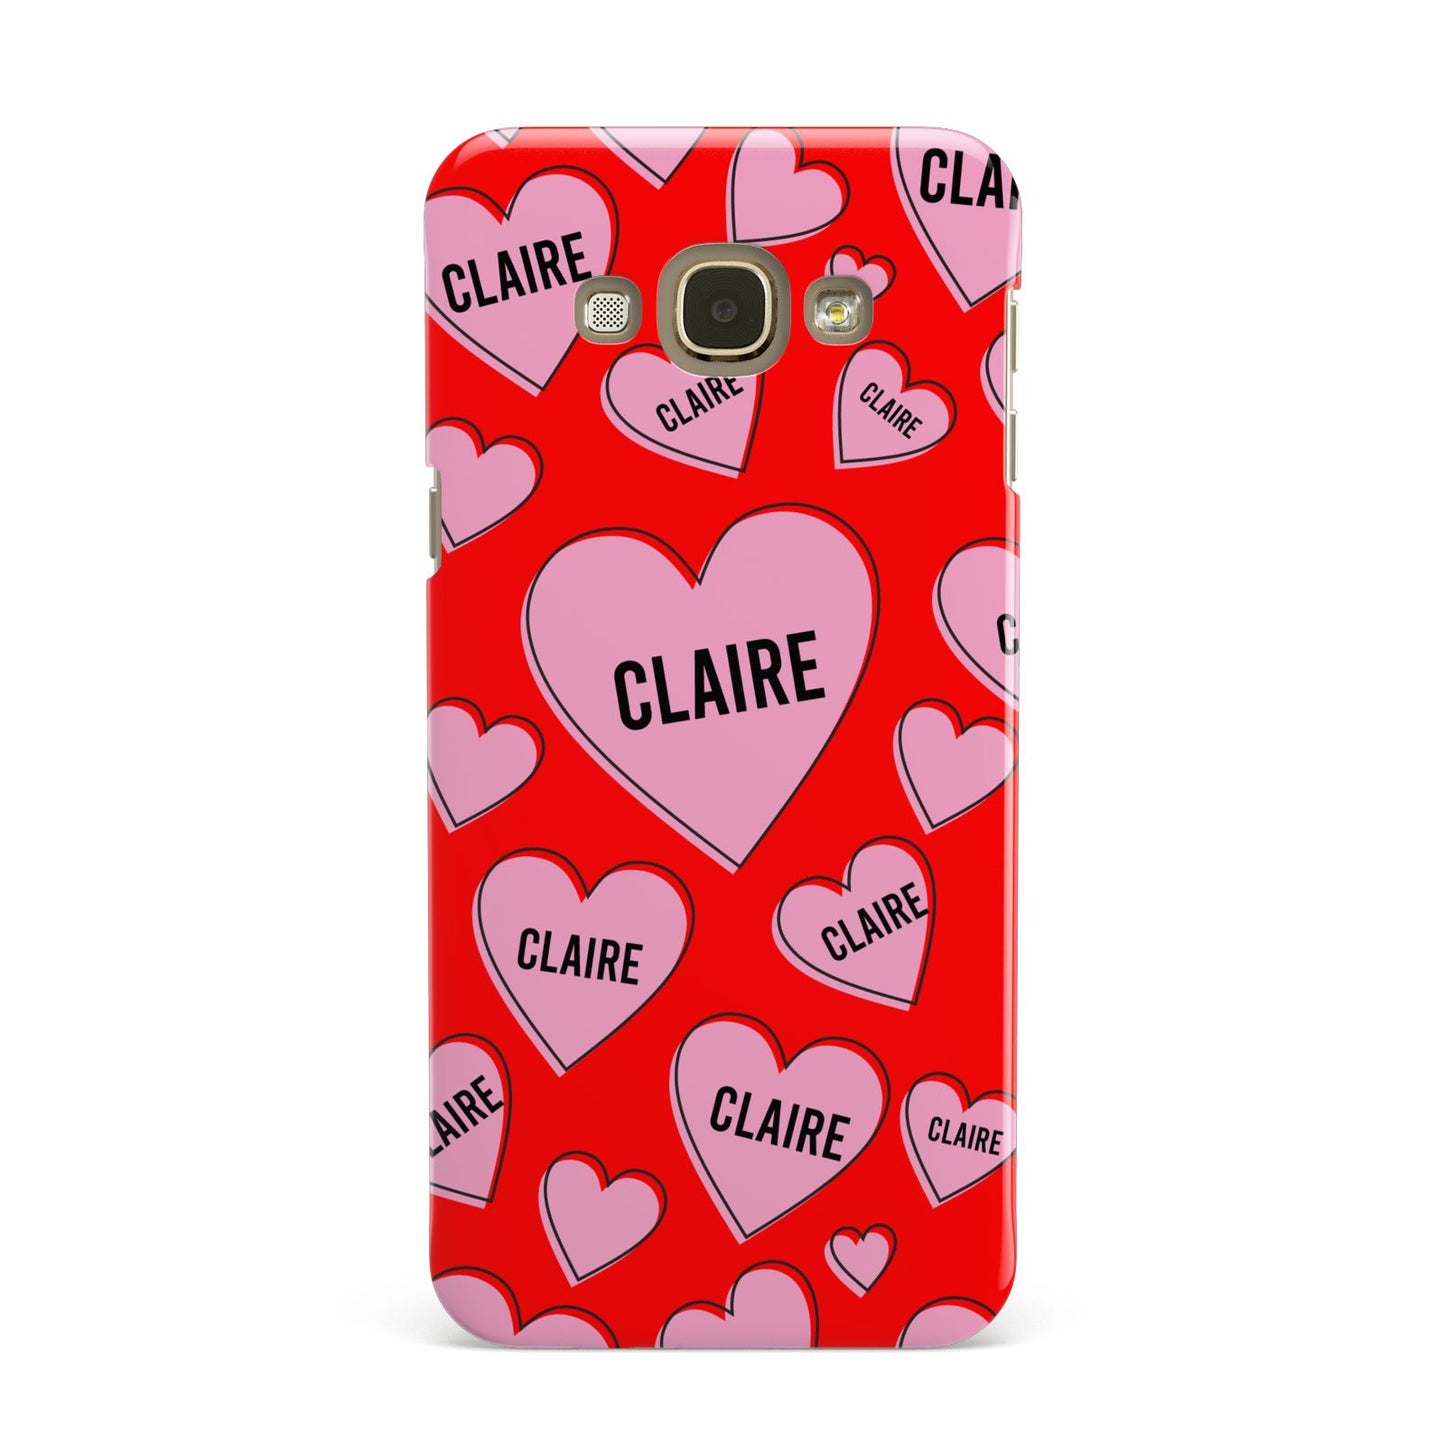 Personalised Hearts Samsung Galaxy A8 Case